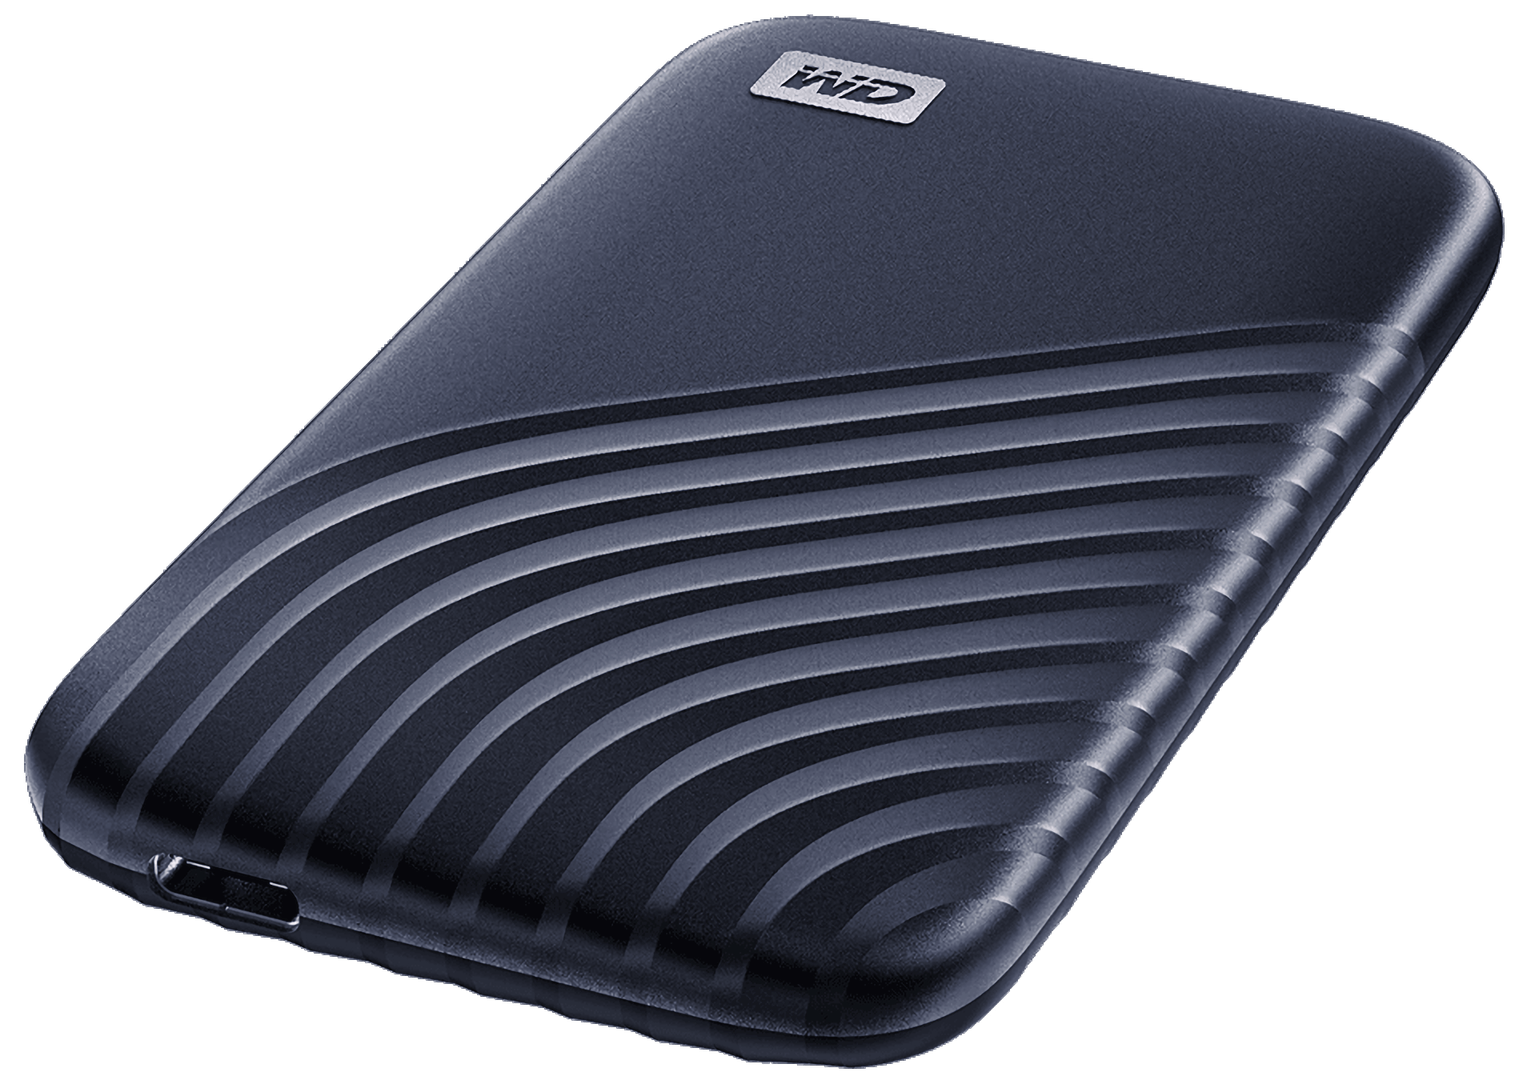 Western Digital's new portable SSDs focus on speed